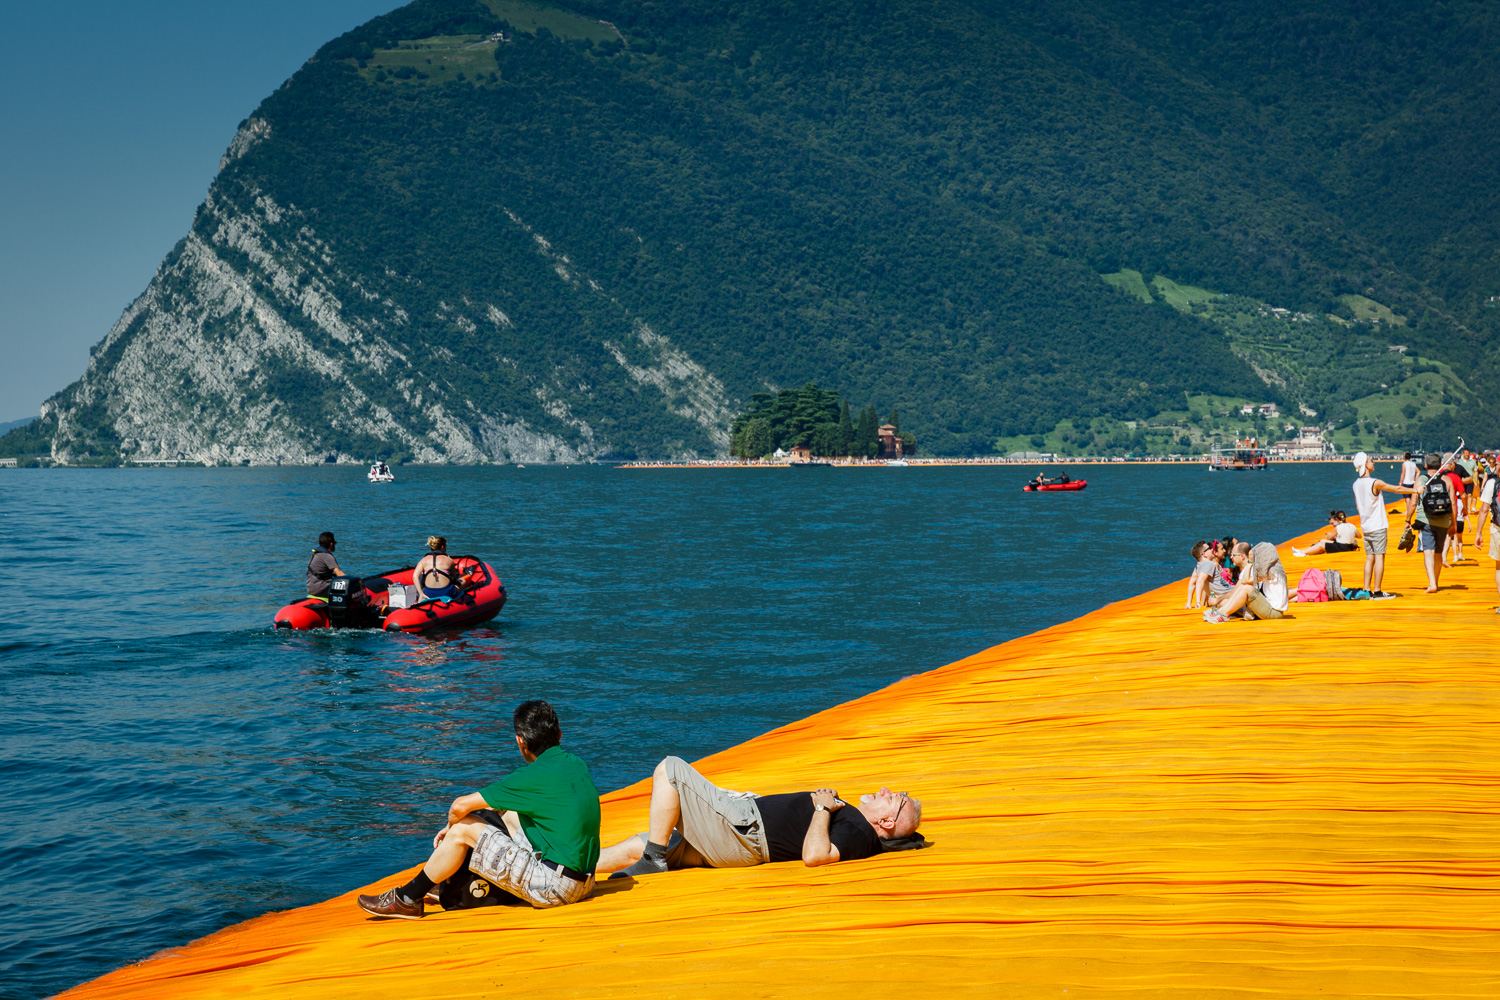 The Floating Piers - Relaxing on the Pier